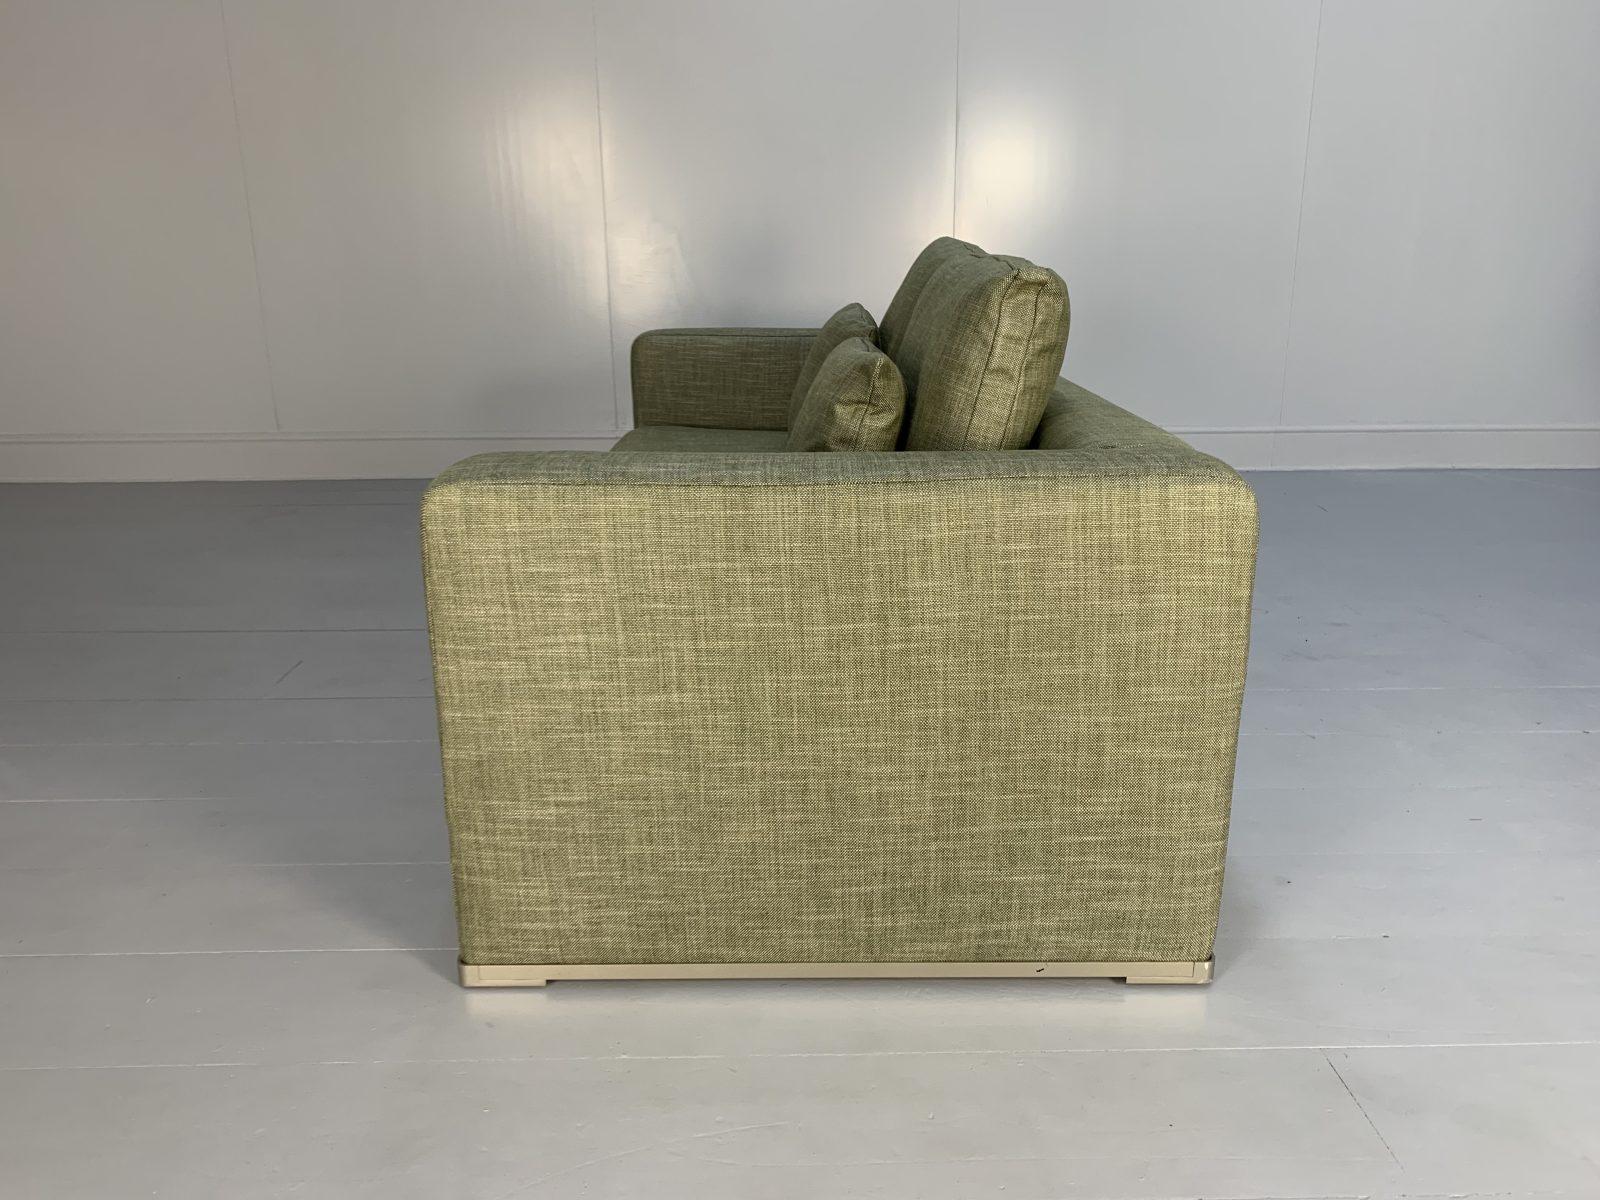 Pair of B&B Italia “Omnia” Sofas, 2.5-Seat, in Pale Green Linen For Sale 1